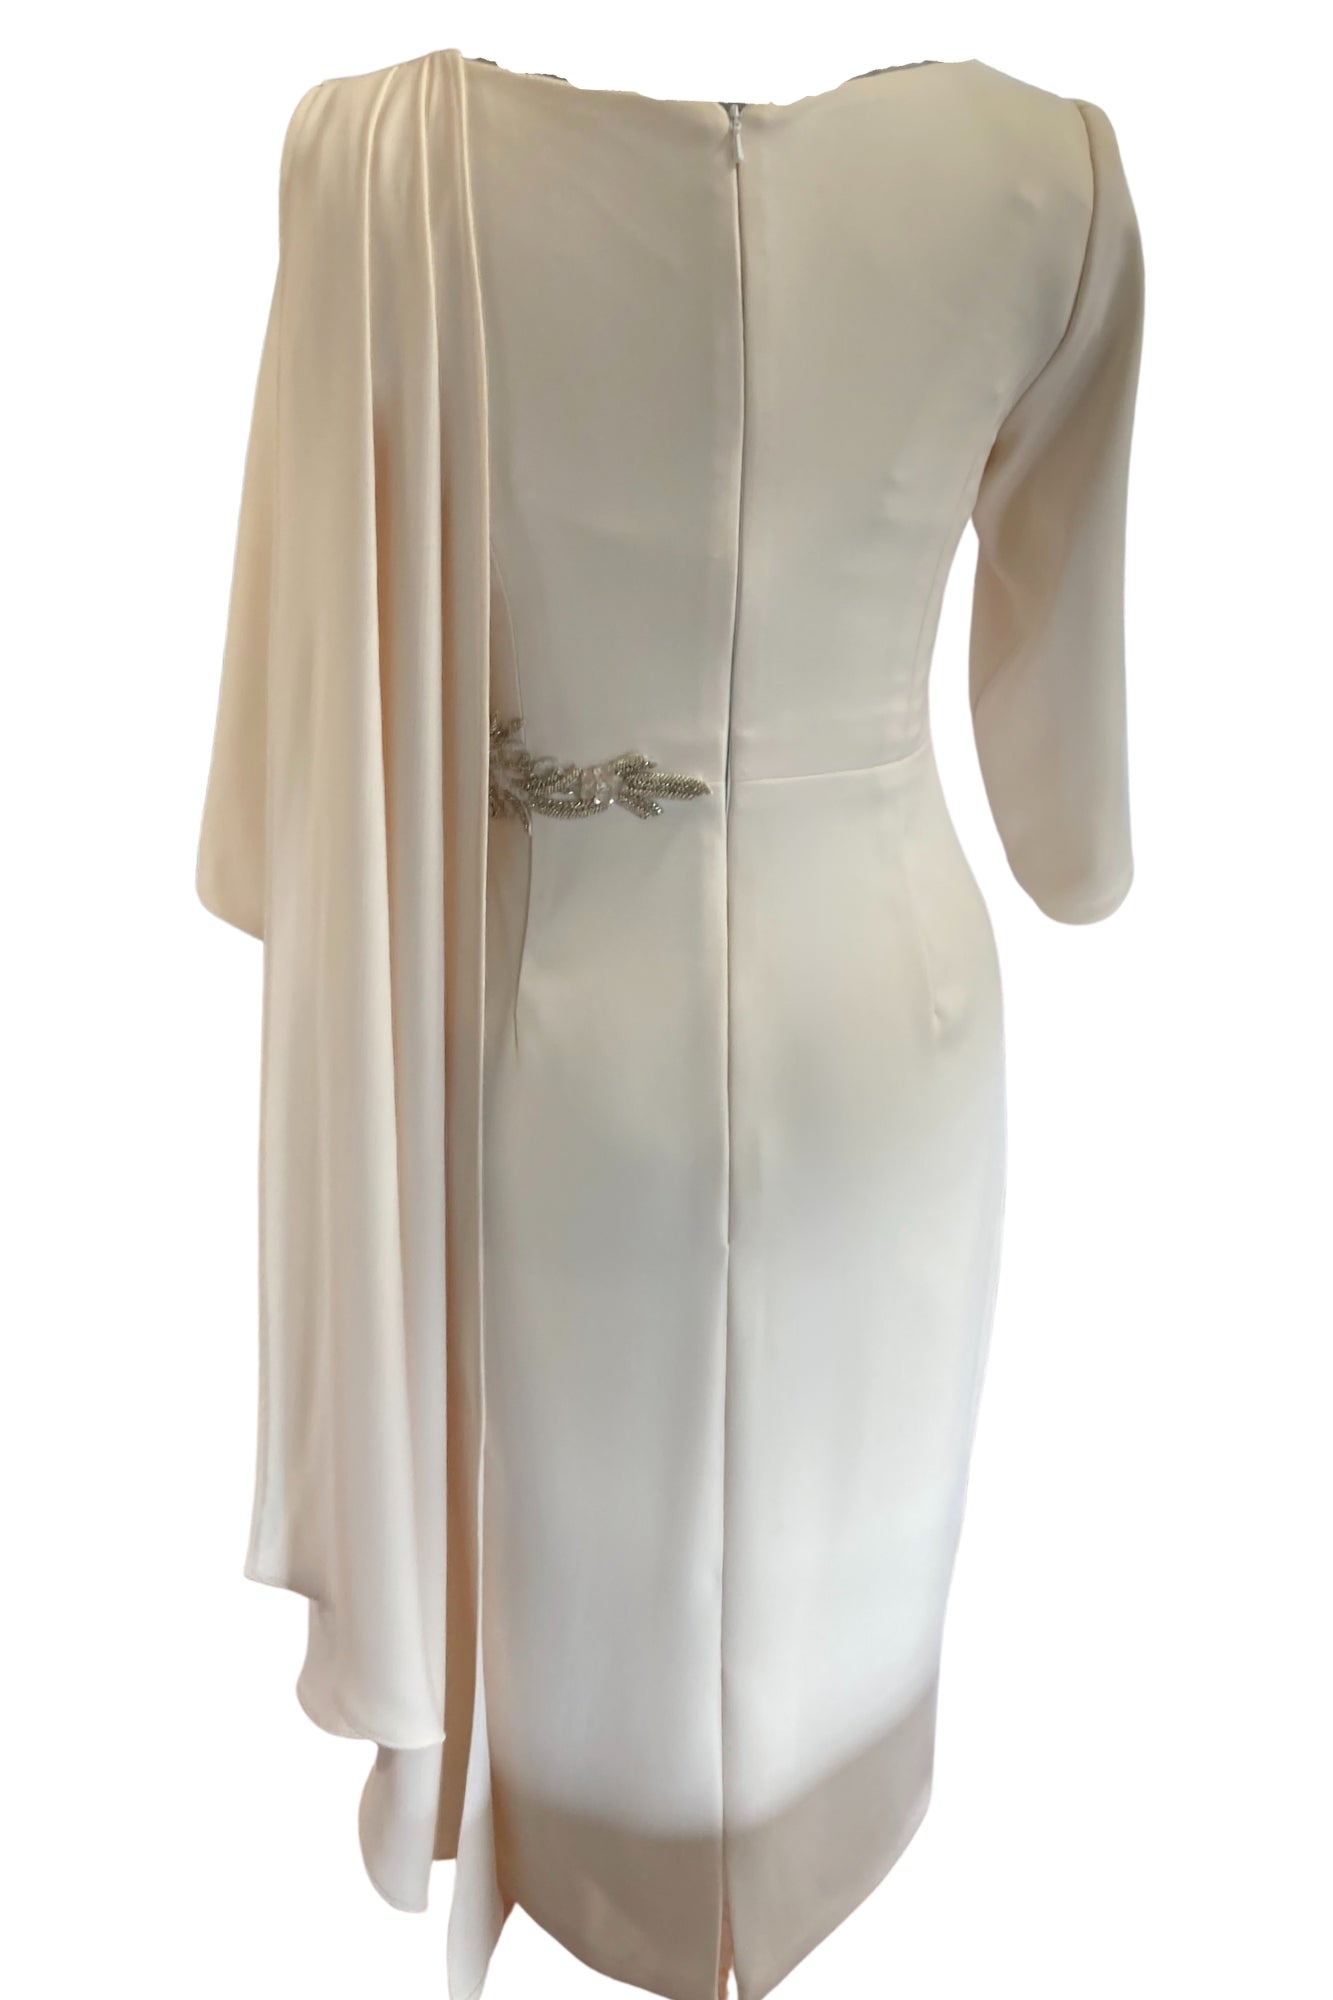 This tailored dress is made in high quality Warm Ivory crepe and has a flattering drape across the bust that extends over the shoulder. The drape detail cascades down the back creating a little extra drama for a special occasion along with the detailed applique that can be on the waist or the shoulder. The dress has three quarter sleeves and is fully lined in satin with a back zip.